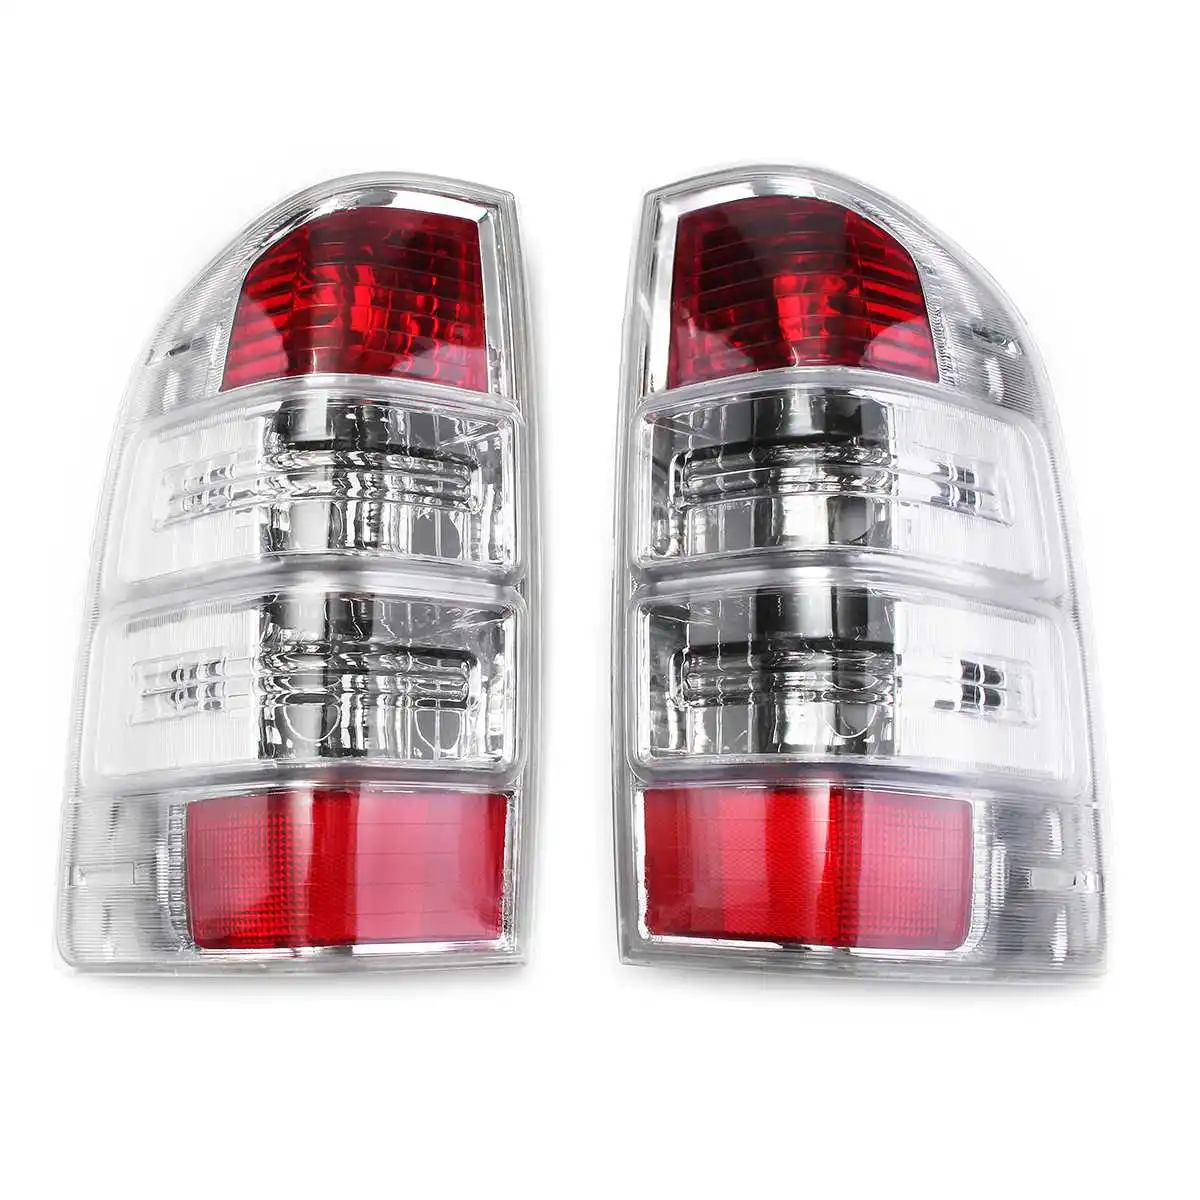 

LED Tail Light Brake Lamp TailLights without harness bulbs For Ford Ranger Thunder Pickup Truck 2006 2007 2008 2009 2010 2011